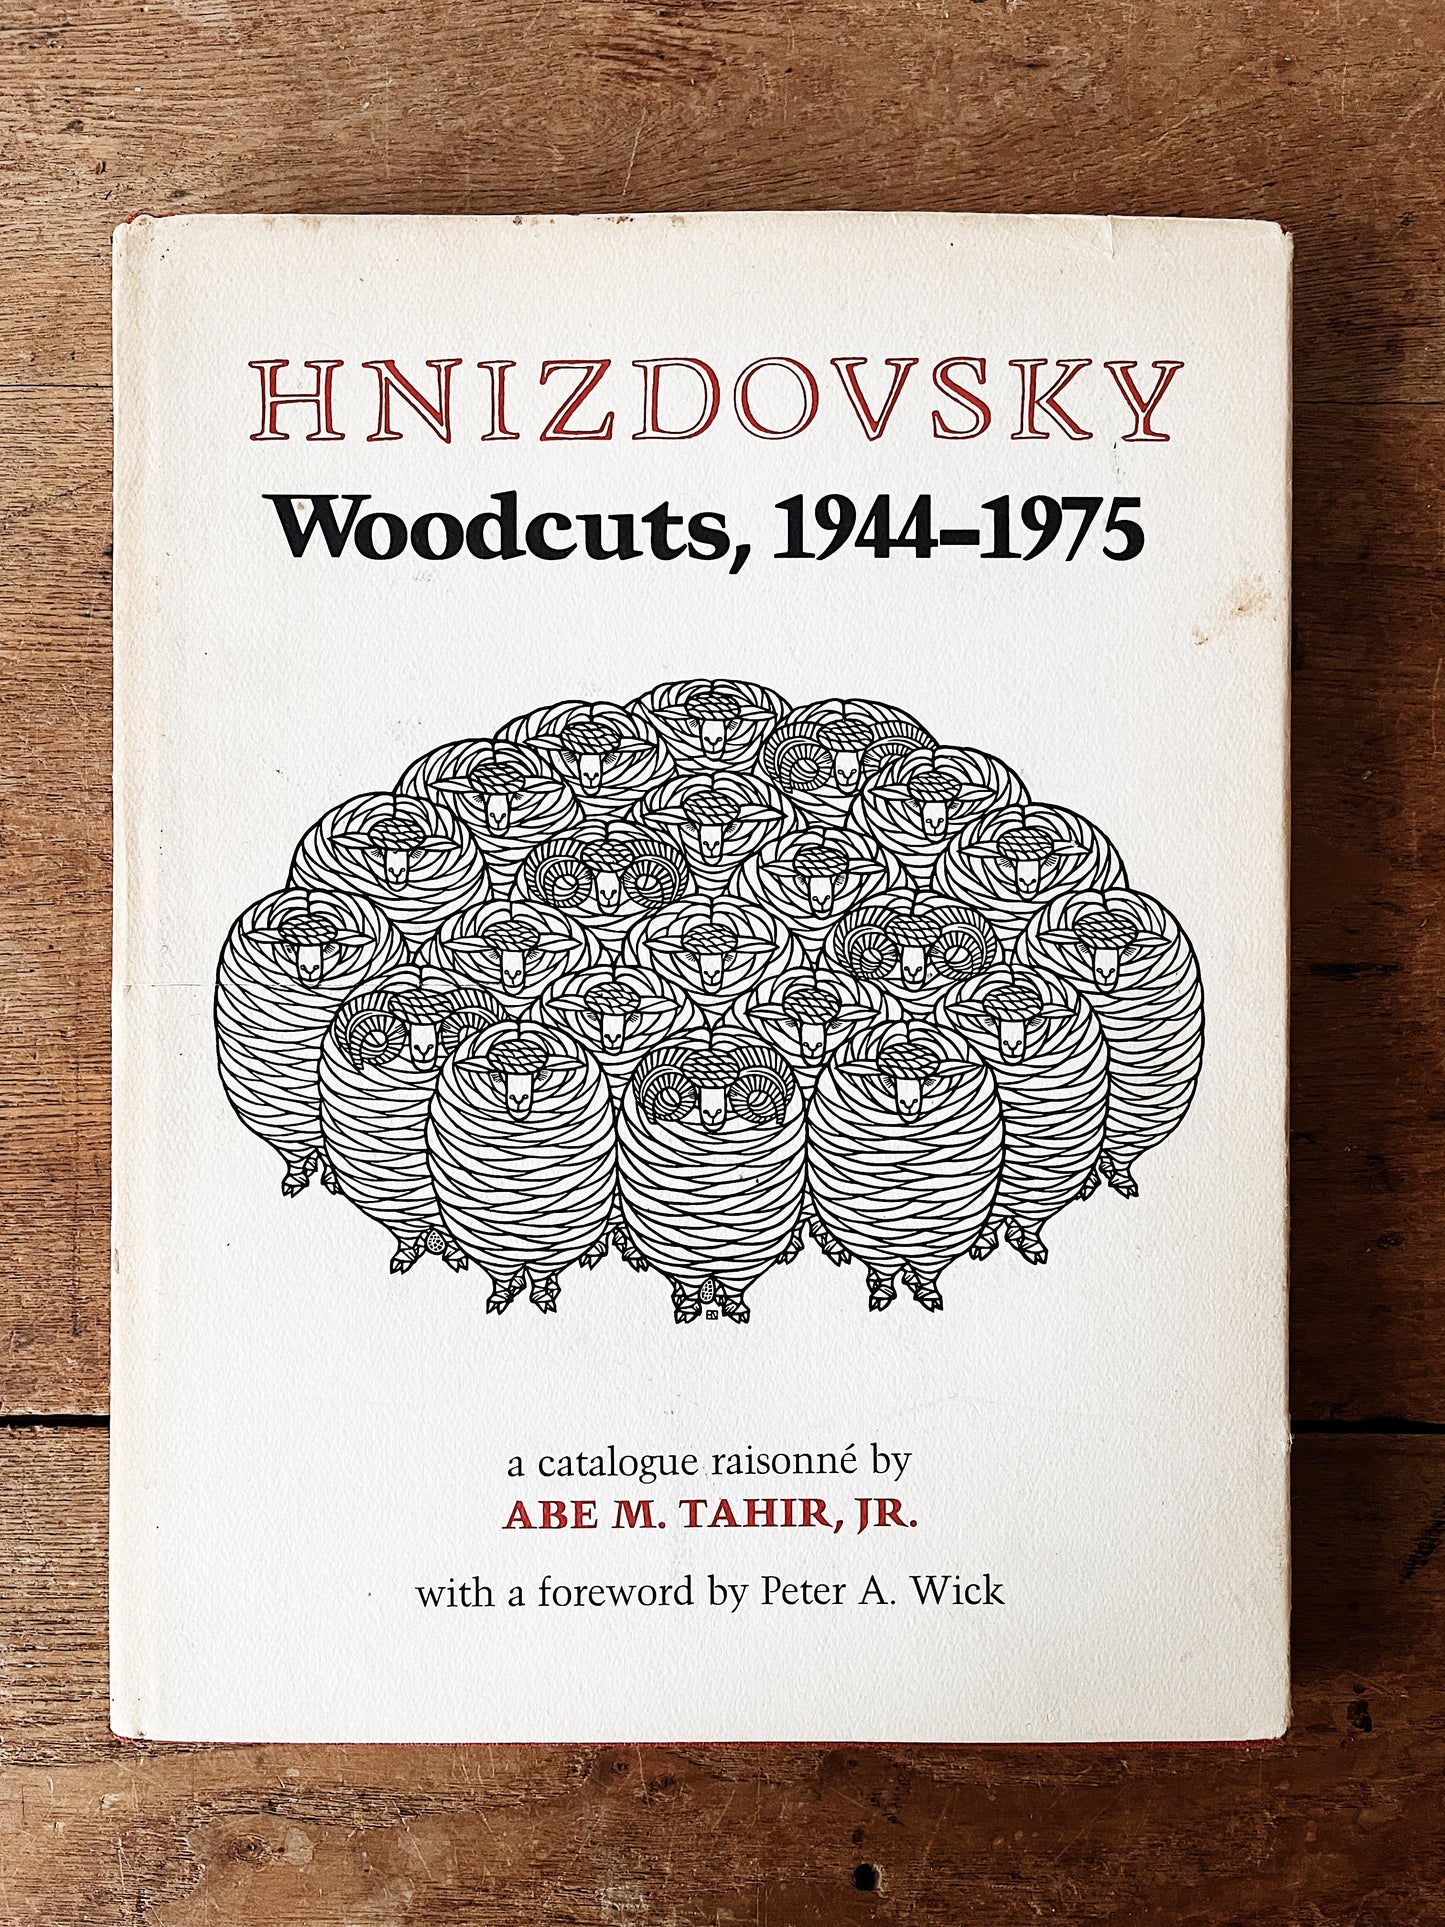 First Ed. Vintage Jaques Hnizdovsky Book of Woodcuts